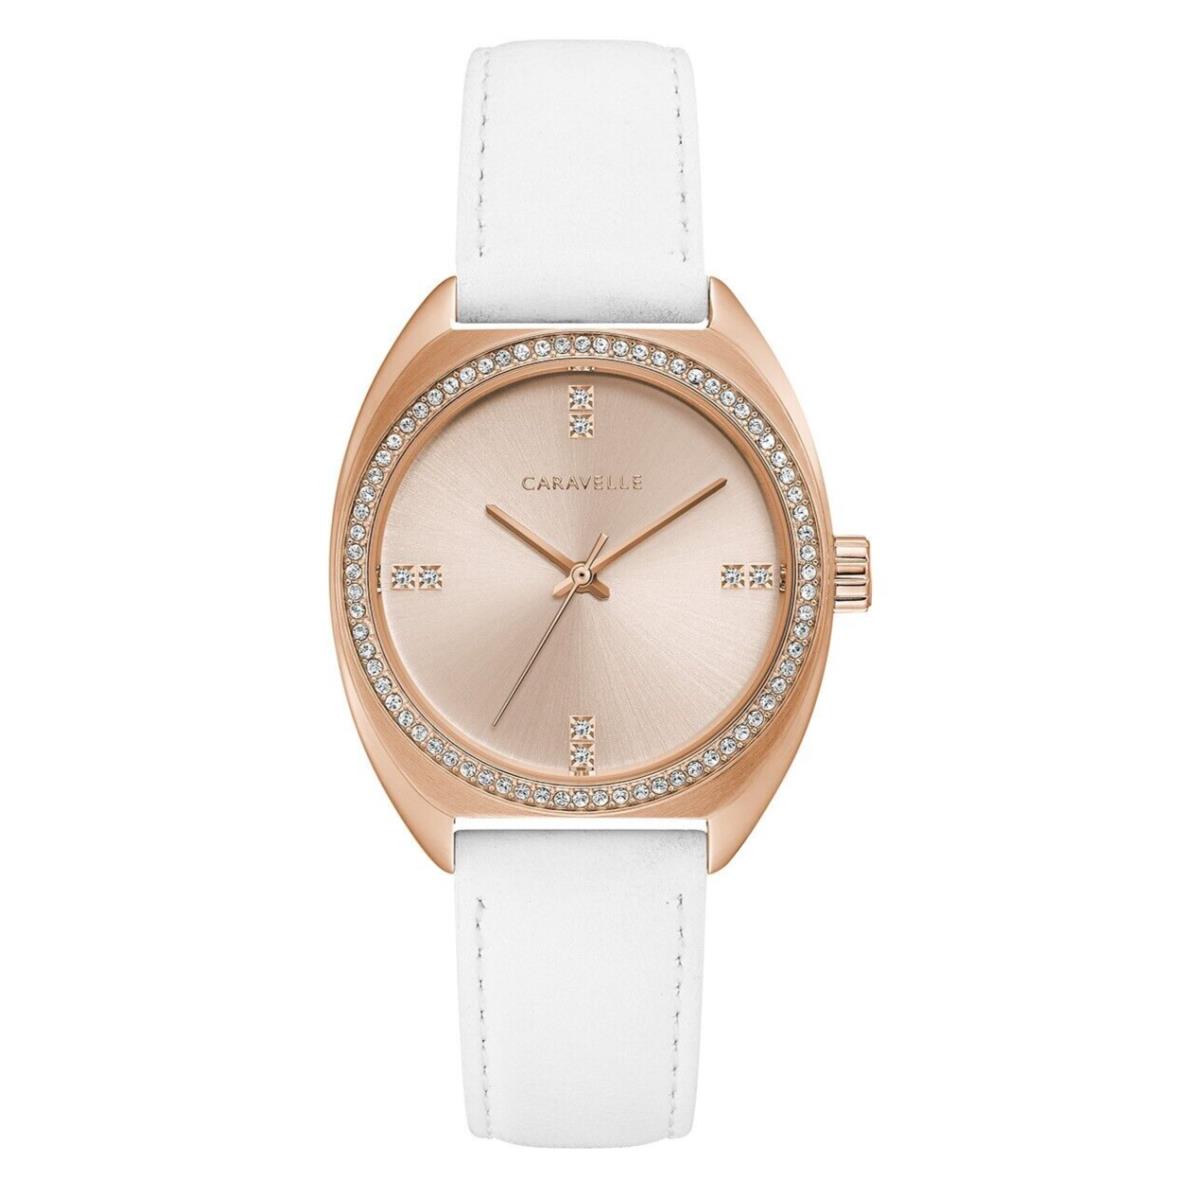 Caravelle Women`s Quartz Crystal Accents Rose-gold Tone Watch 32MM 44L251 - Dial: Rose Gold, Band: White, Bezel: Rose Gold|Silver